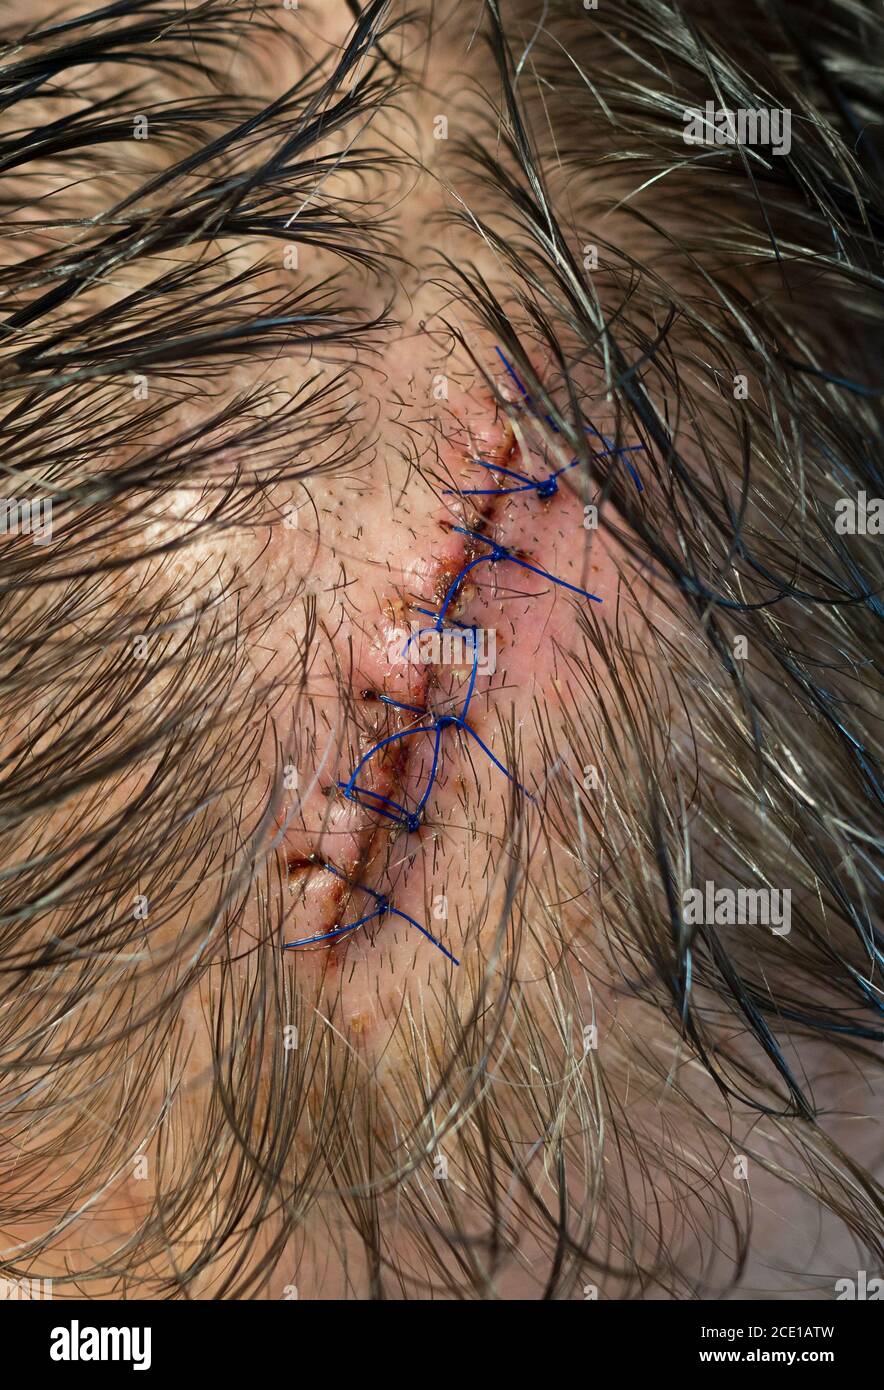 A stitched wound on the man's head. Close-up view. Stock Photo